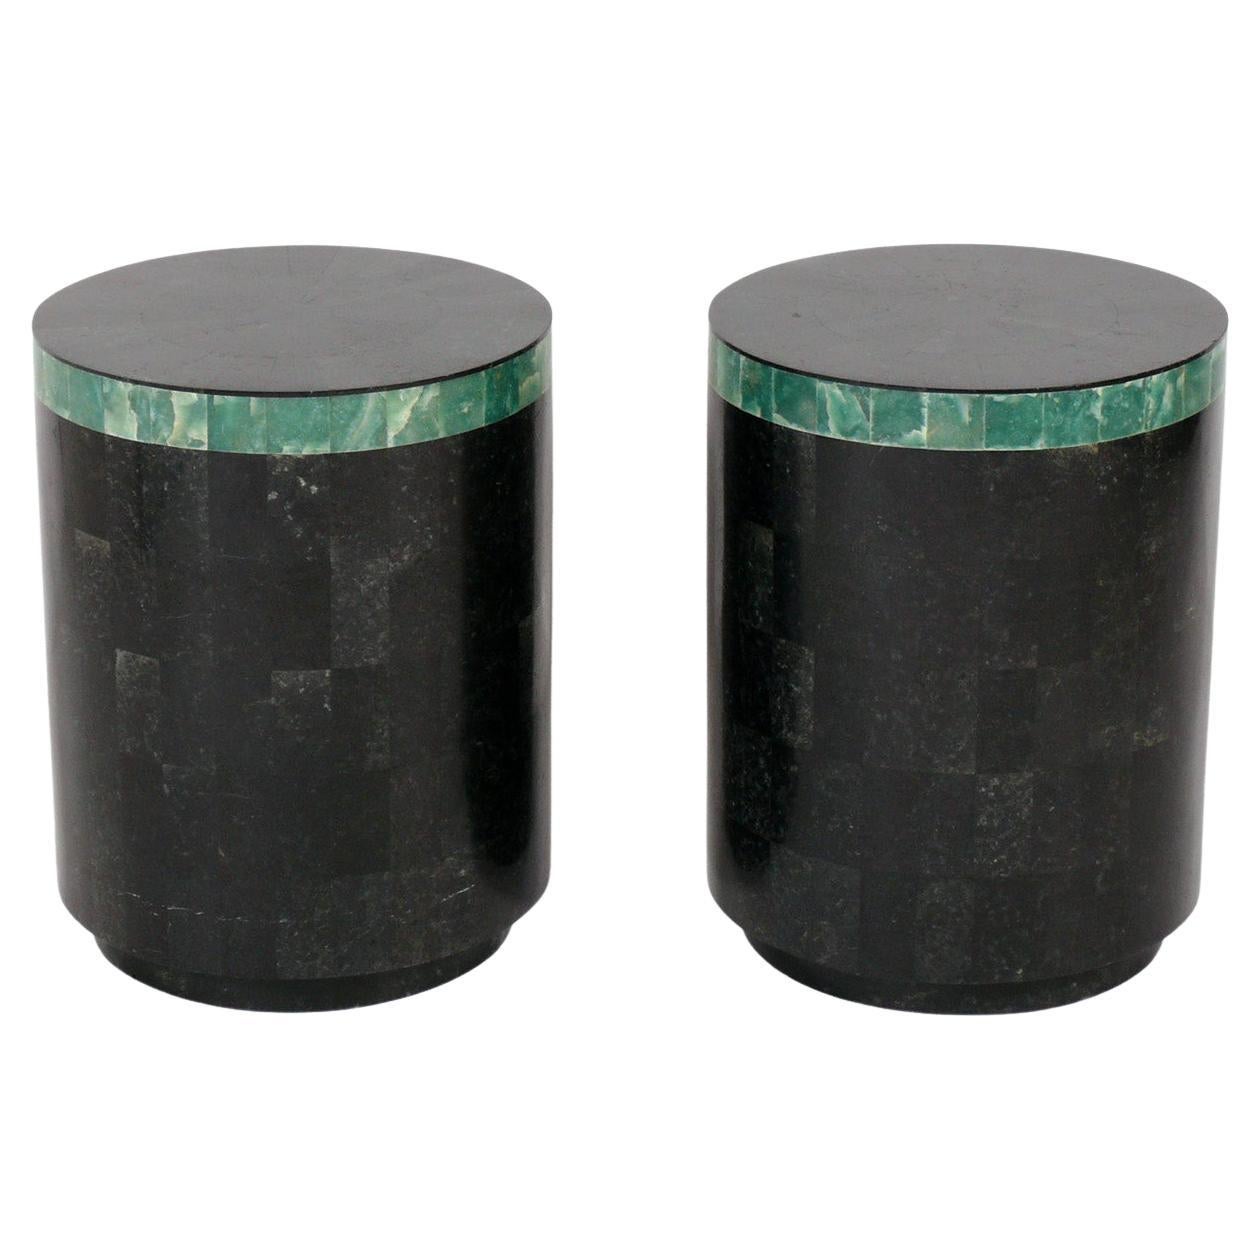 Pair of Tessellated Stone End Tables circa 1980s